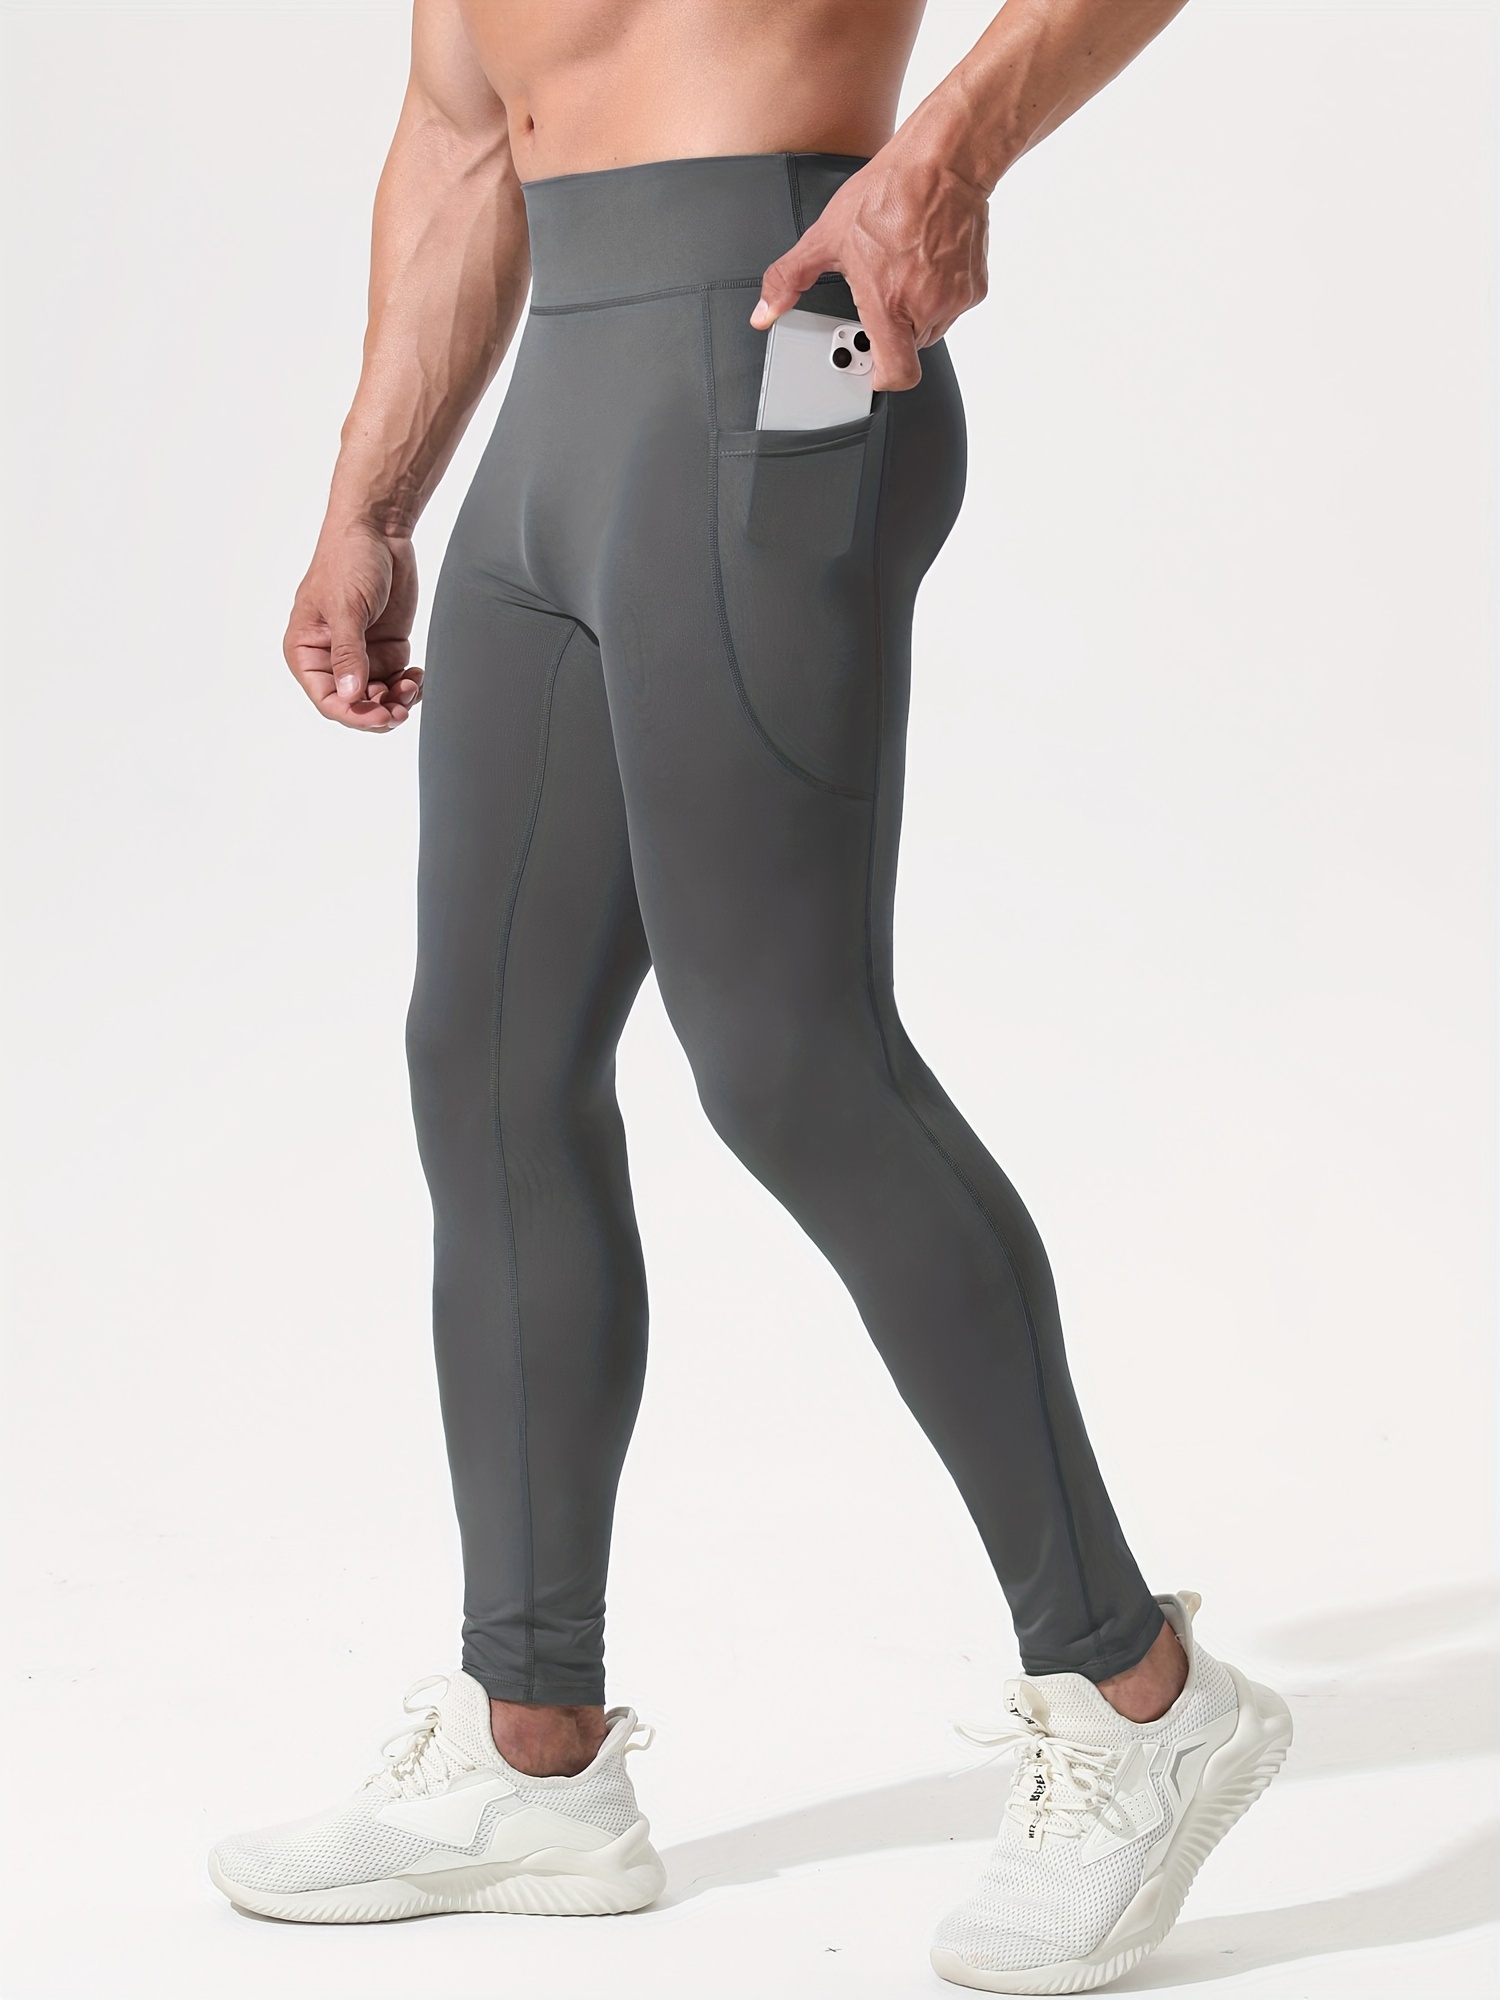 Quick Drying Mens Compression Running Leggings With Reflective Stripes And  Pant Zipper Ideal For Jogging, Fitness, And Gym Workouts Style X0824 From  Fashion_official01, $15.48